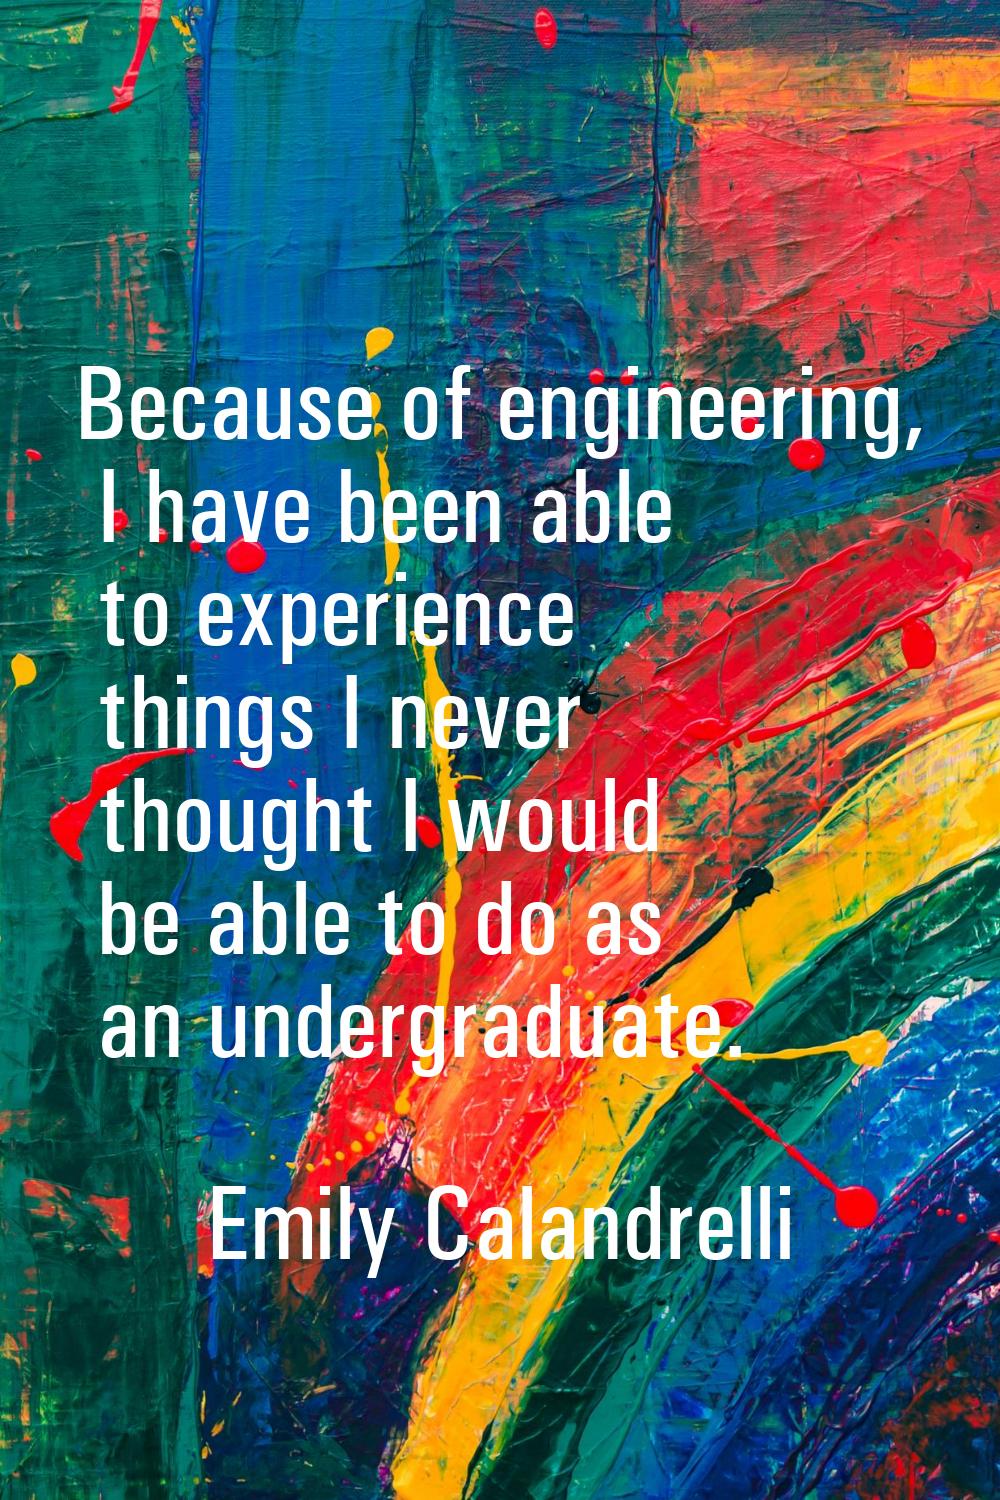 Because of engineering, I have been able to experience things I never thought I would be able to do